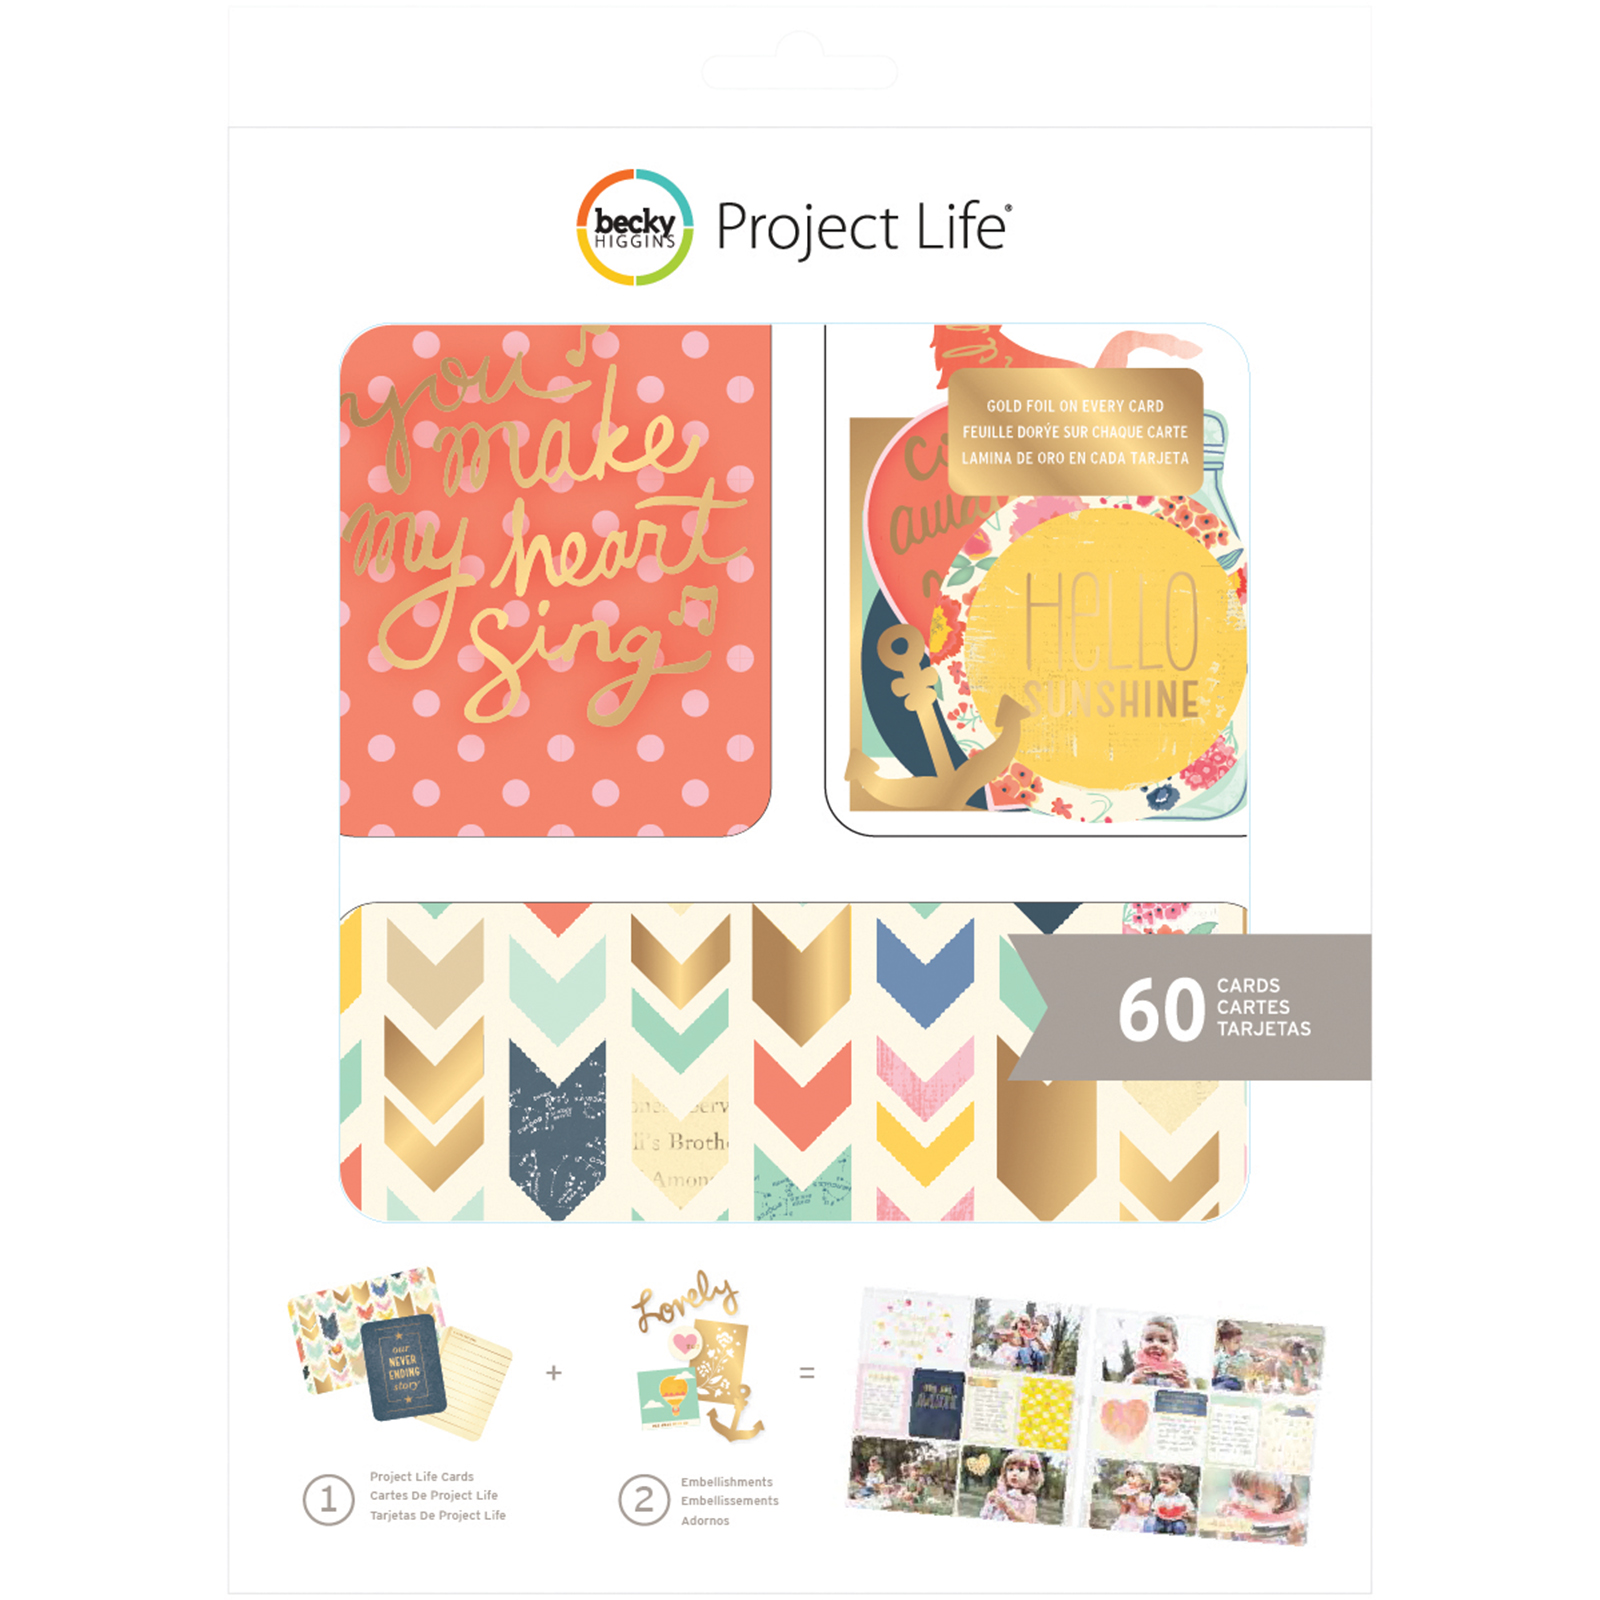 Project Life • Value kit lucky charm